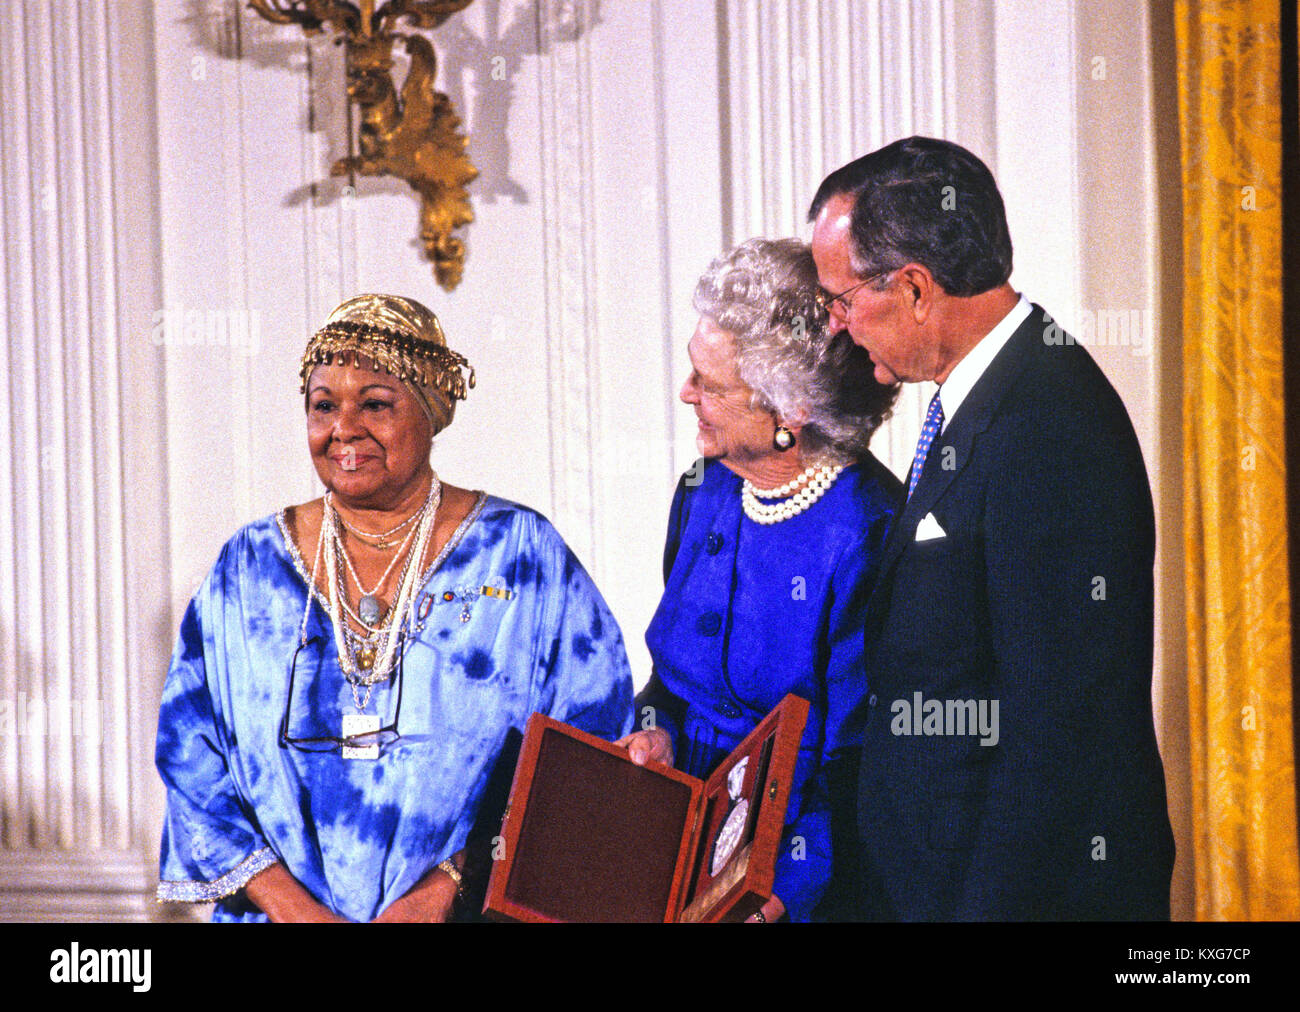 Washington, District of Columbia, USA. 17th Nov, 1989. United States President George H.W. Bush and first lady Barbara Bush present the National Medal of Arts to American dancer and choreographer Katherine Dunham during a ceremony in the East Room of the White House in Washington, DC on November 19, 1989. Credit: Ron Sachs/CNP Credit: Ron Sachs/CNP/ZUMA Wire/Alamy Live News Stock Photo